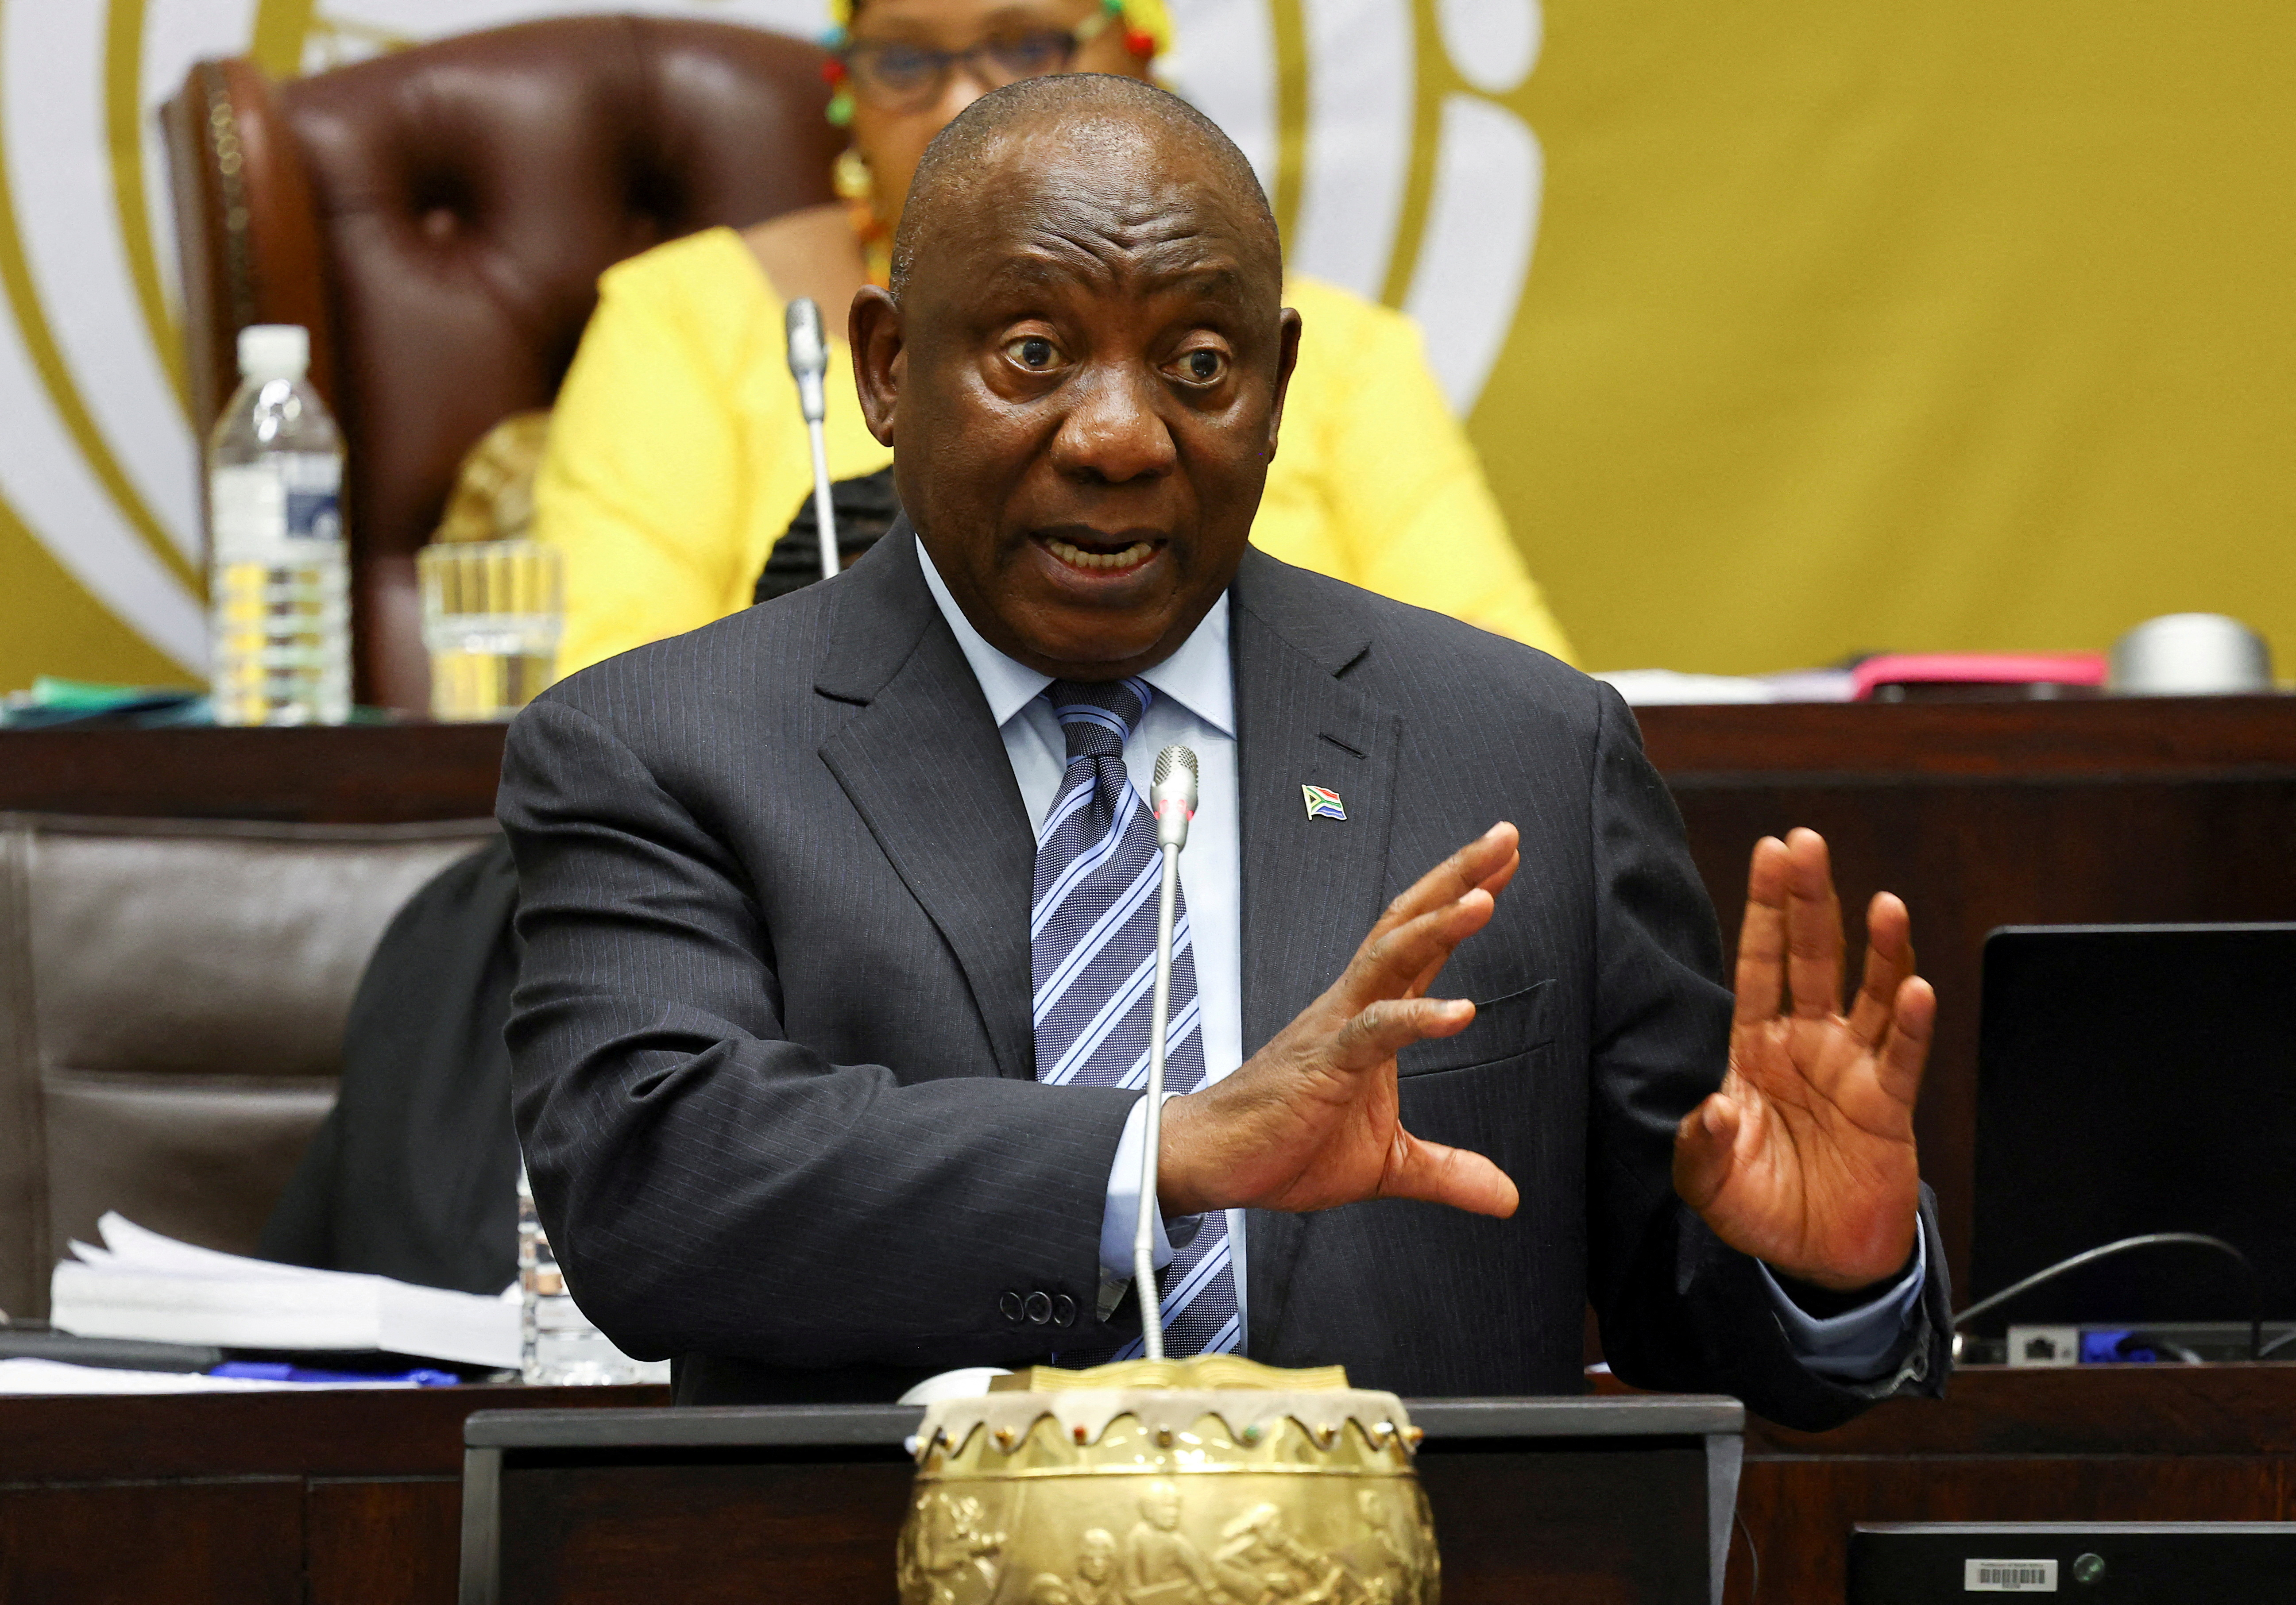 South African President Ramaphosa responds to questions in parliament, in Cape Town